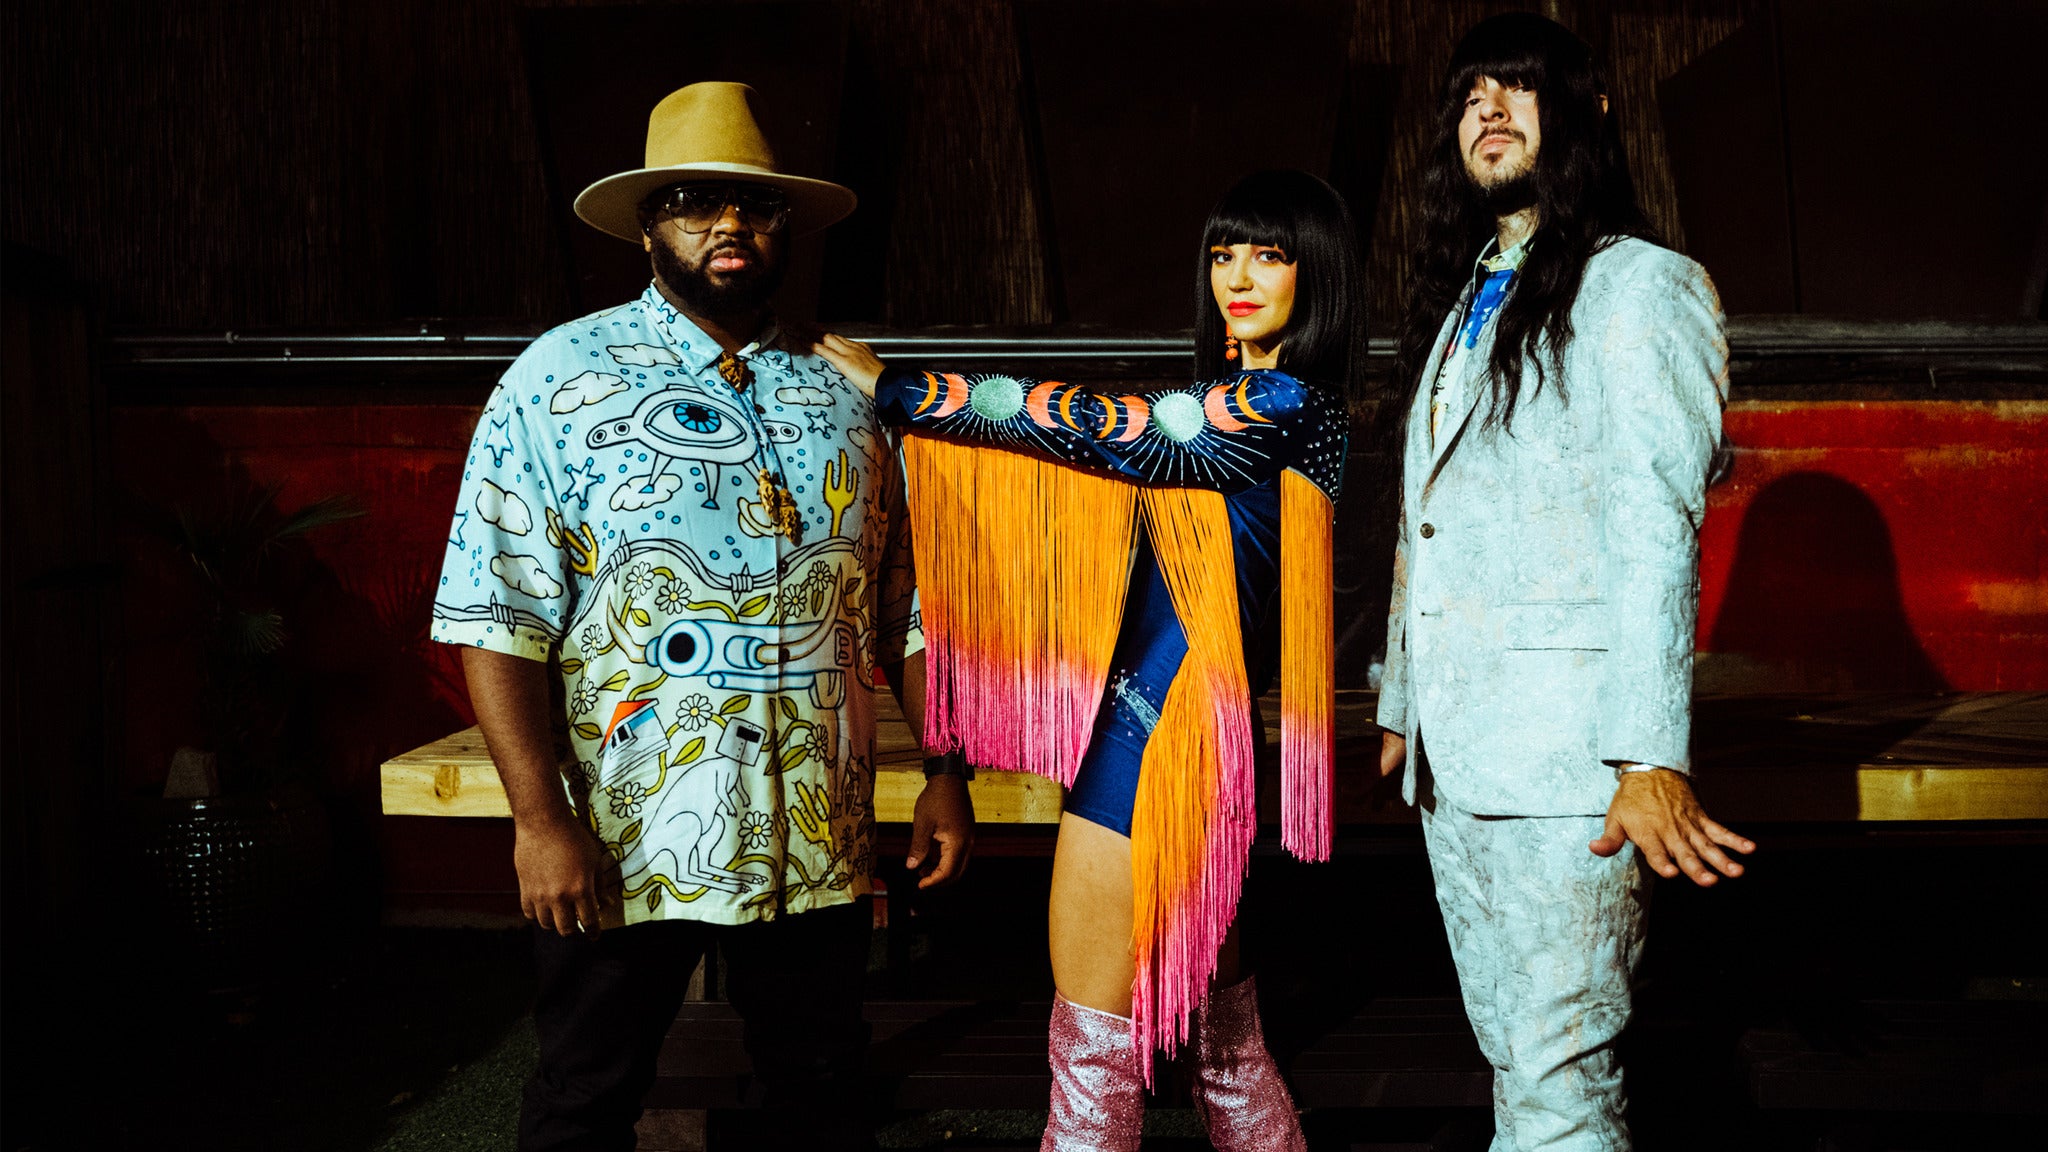 Khruangbin at Outlaw Field at the Idaho Botanical Garden - Boise, ID 83712